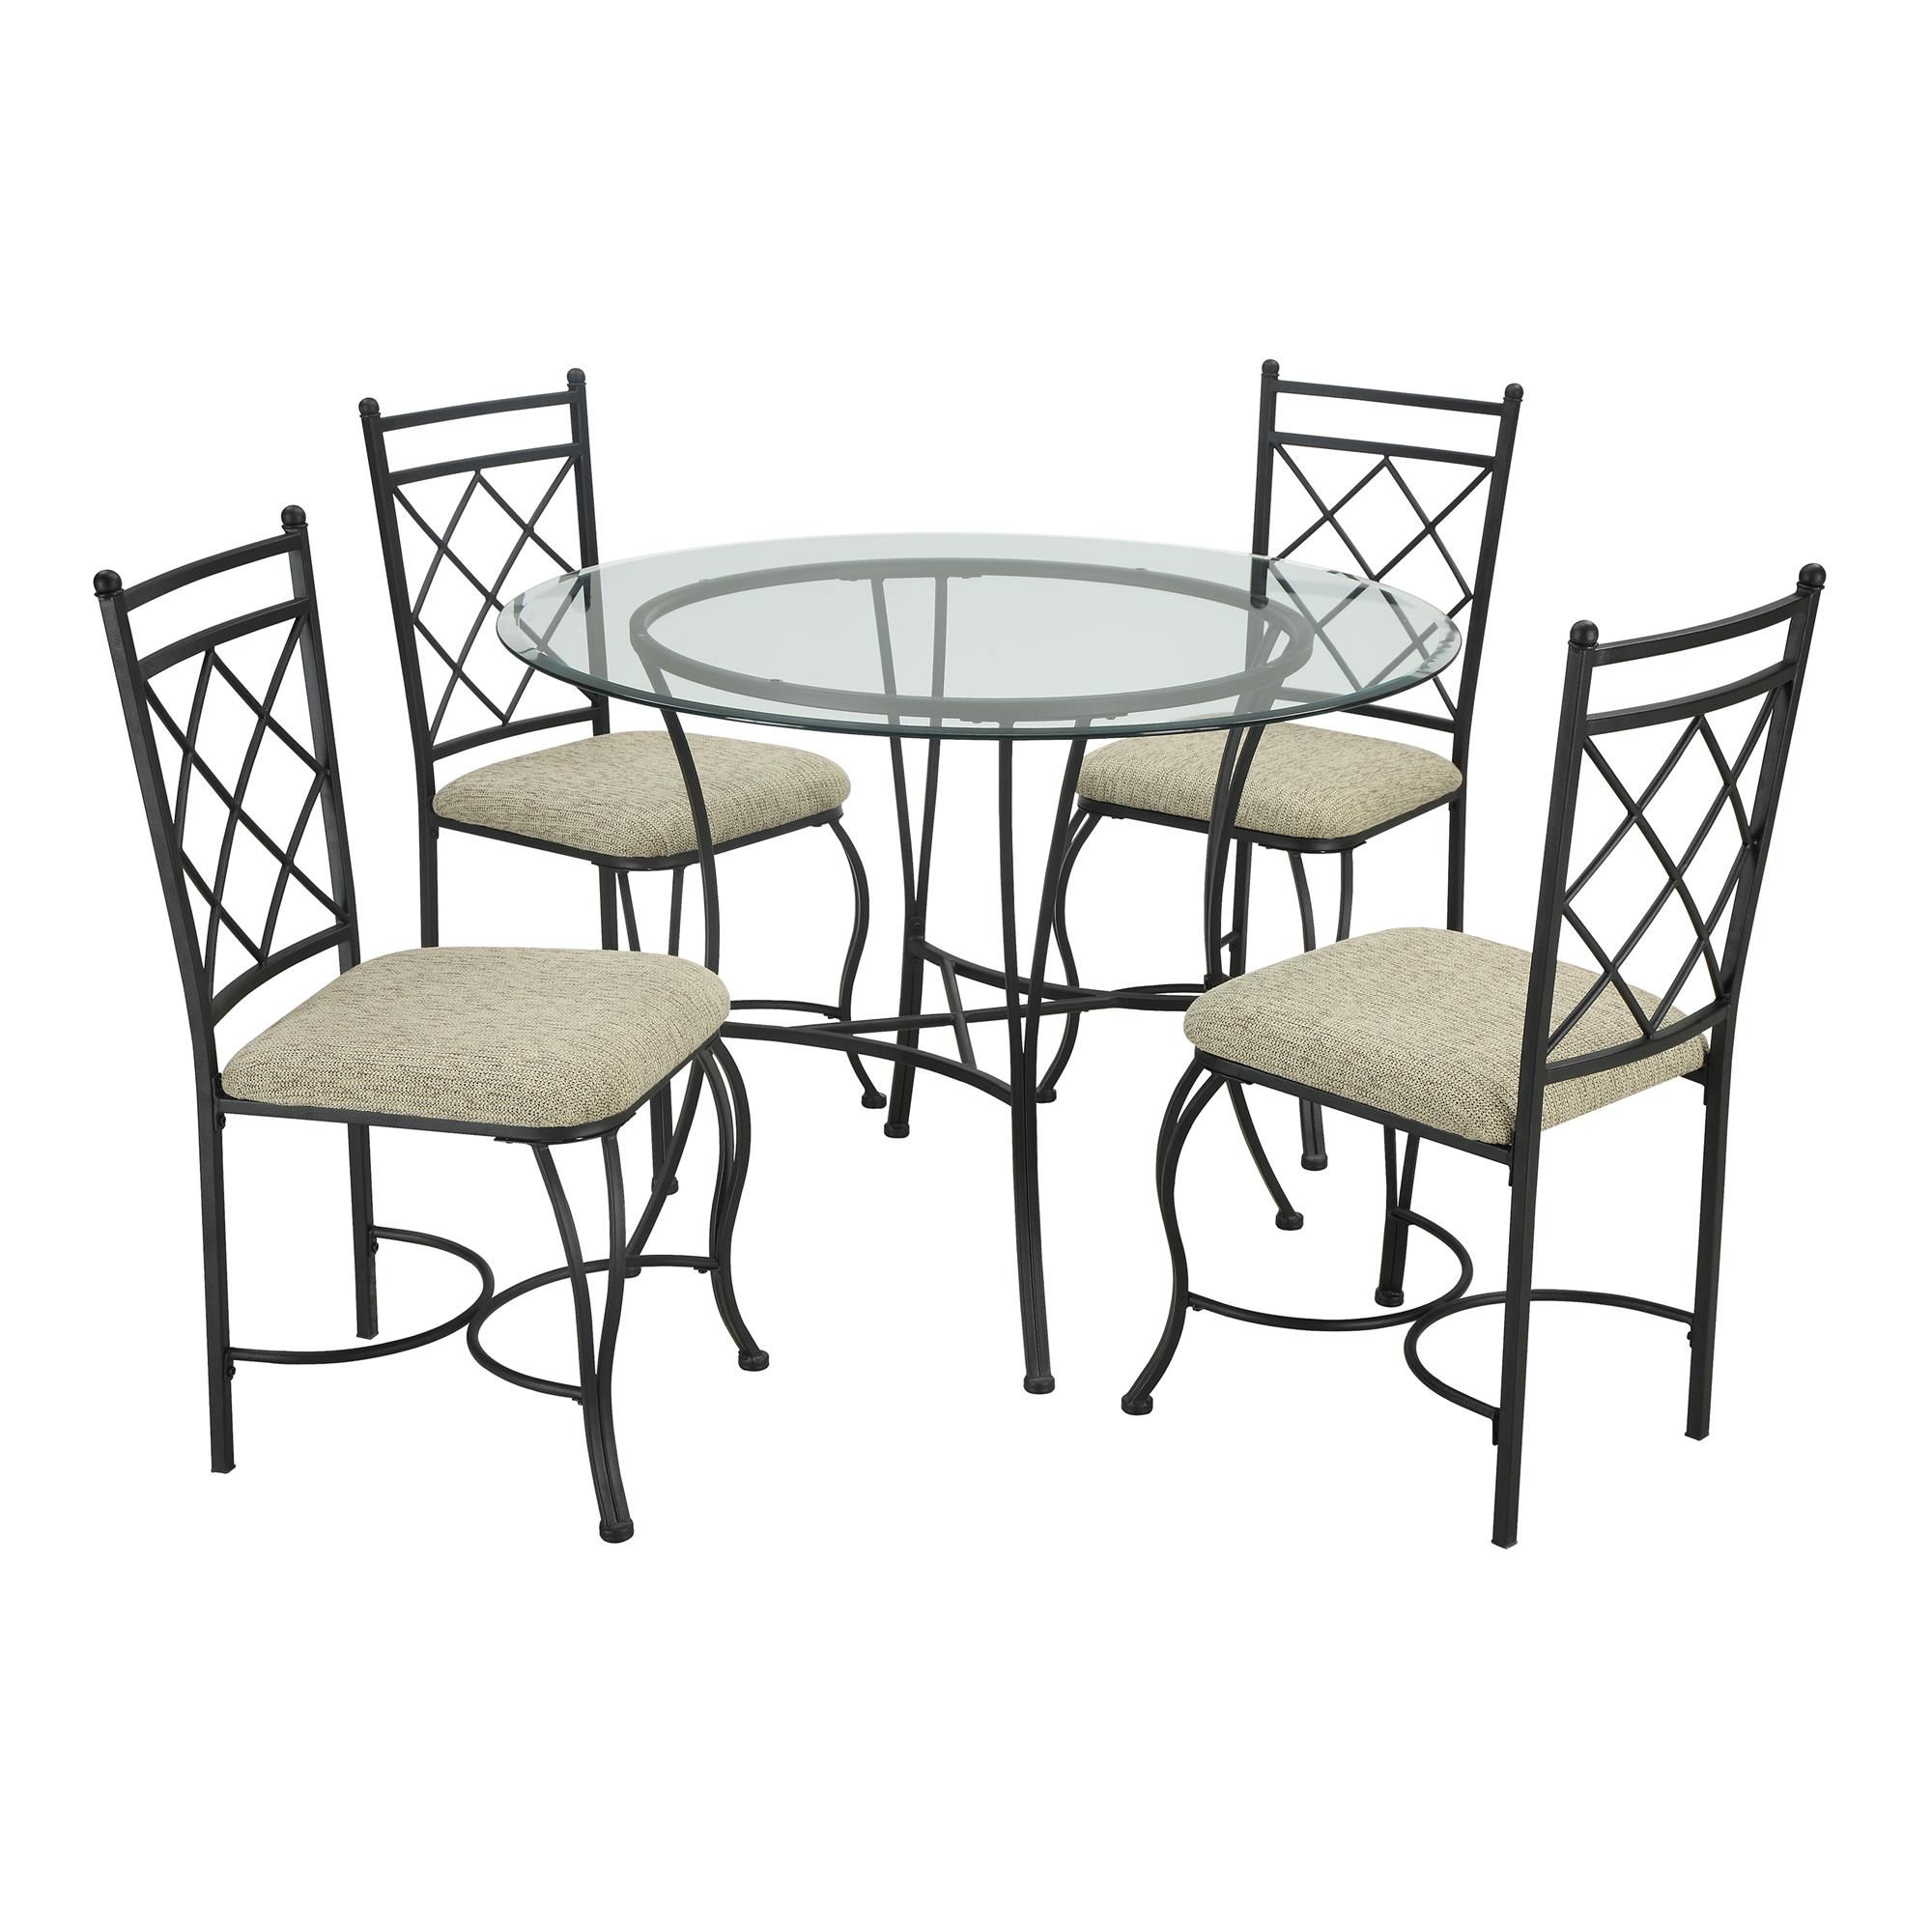 NEW Dining Table Set Kitchen Chairs 5 piece Glass Top Metal Tables Contemporary Room Decor Counter Height Comfortable Home Seats Indoor *↓READ↓*